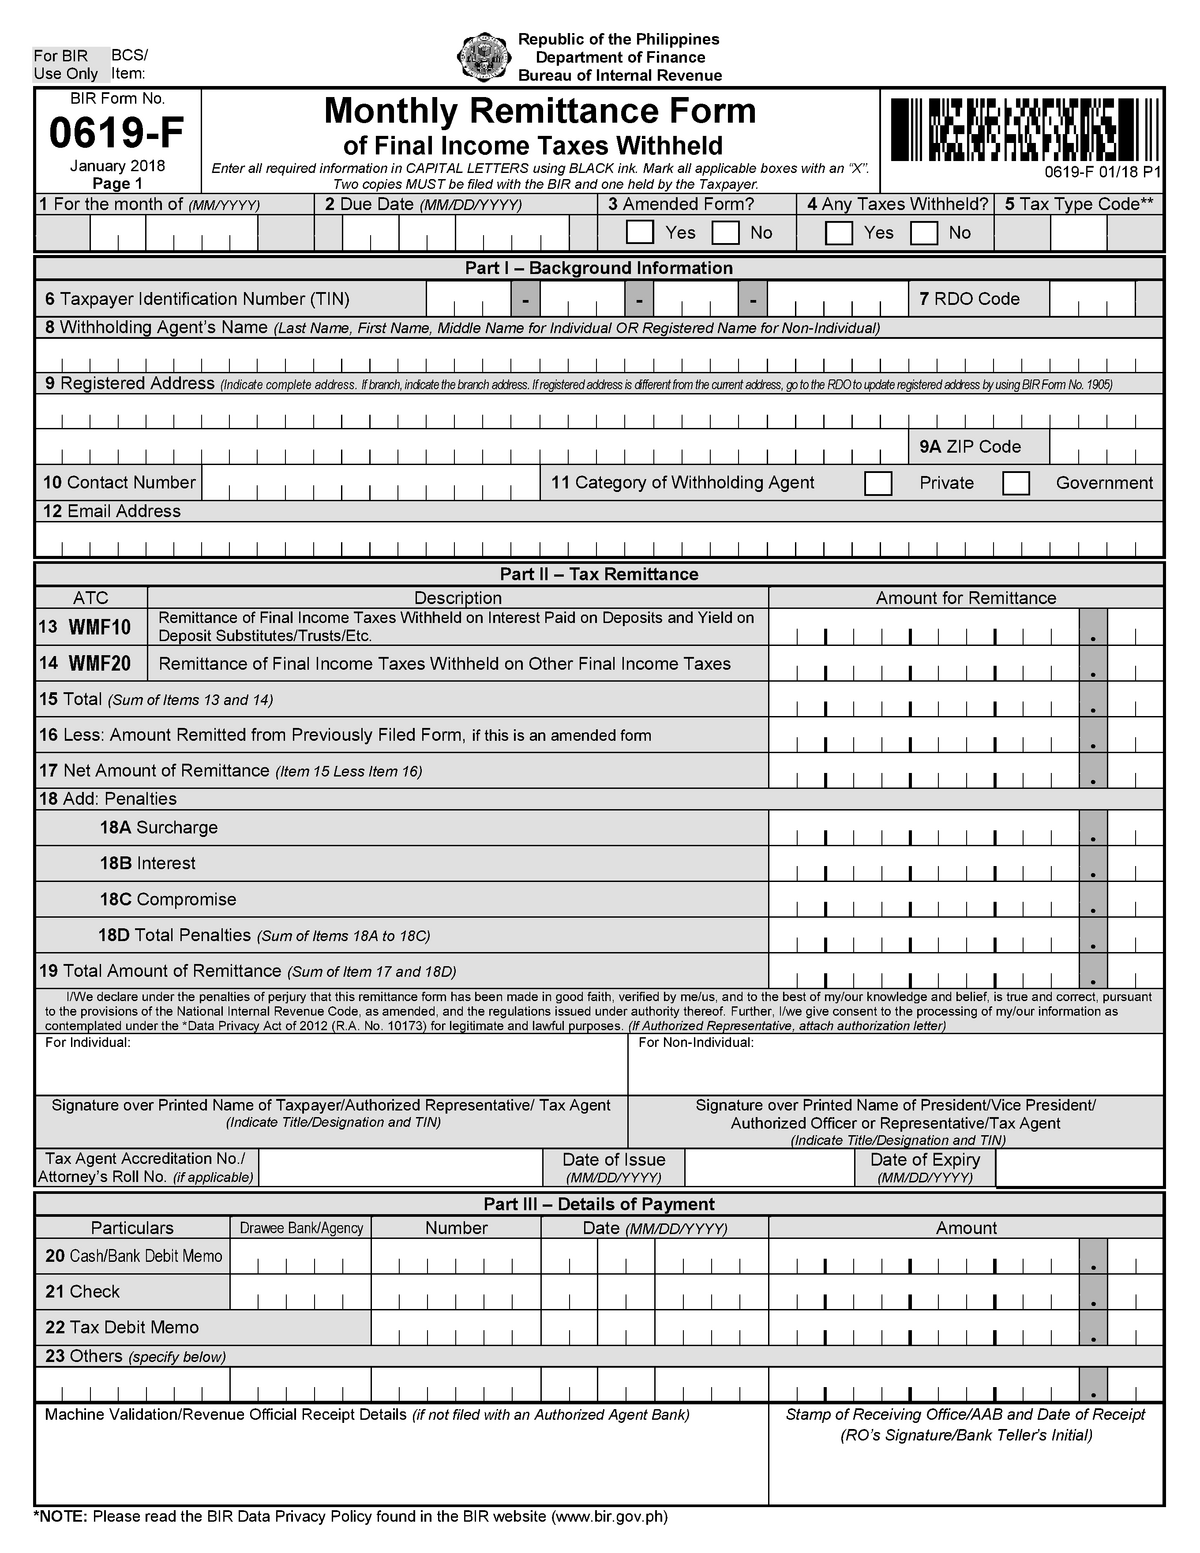 0619-f-jan-2018-rev-final-bir-form-no-061-9-f-january-2018-page-1-monthly-remittance-form-of